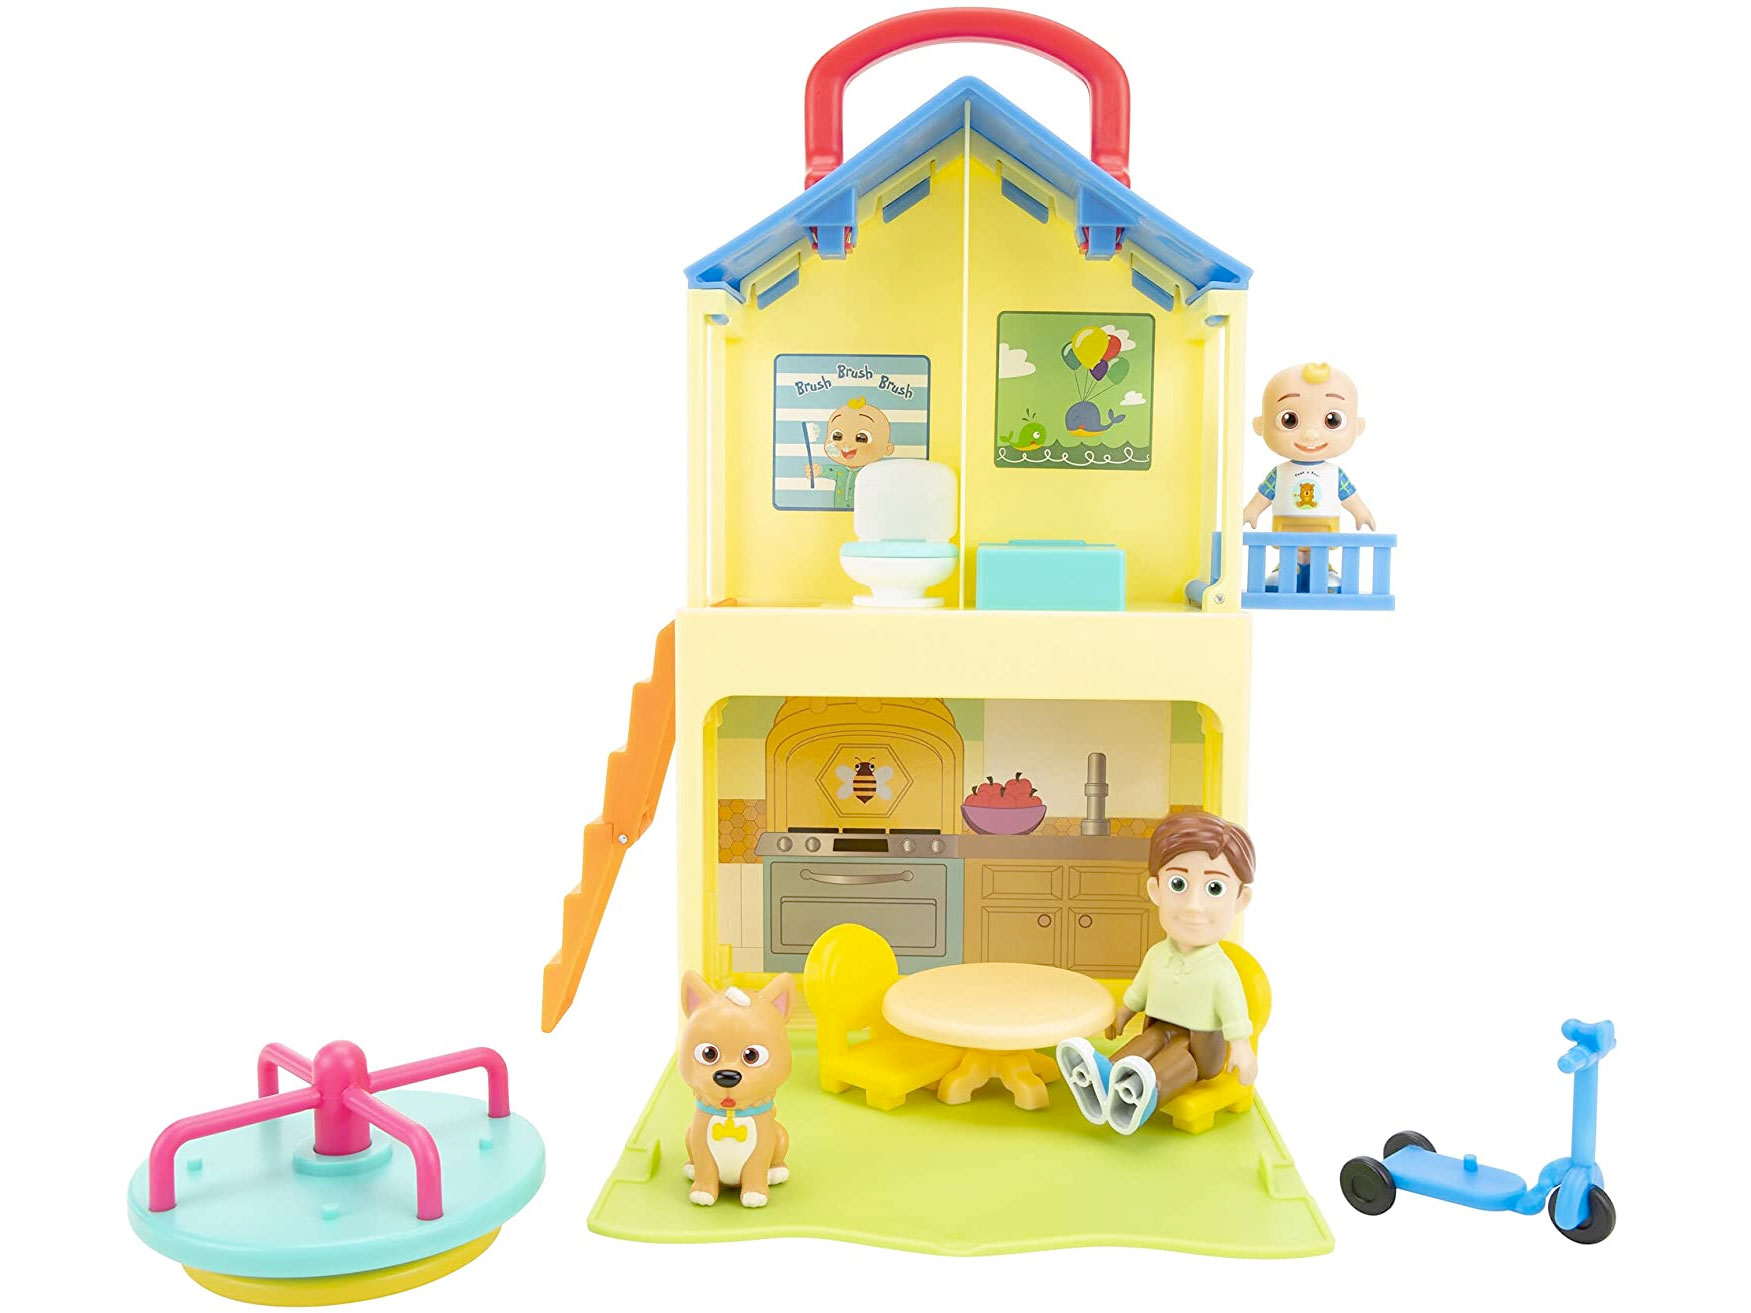 Amazon：CoComelon Deluxe Pop n’ Play House只卖$27.29